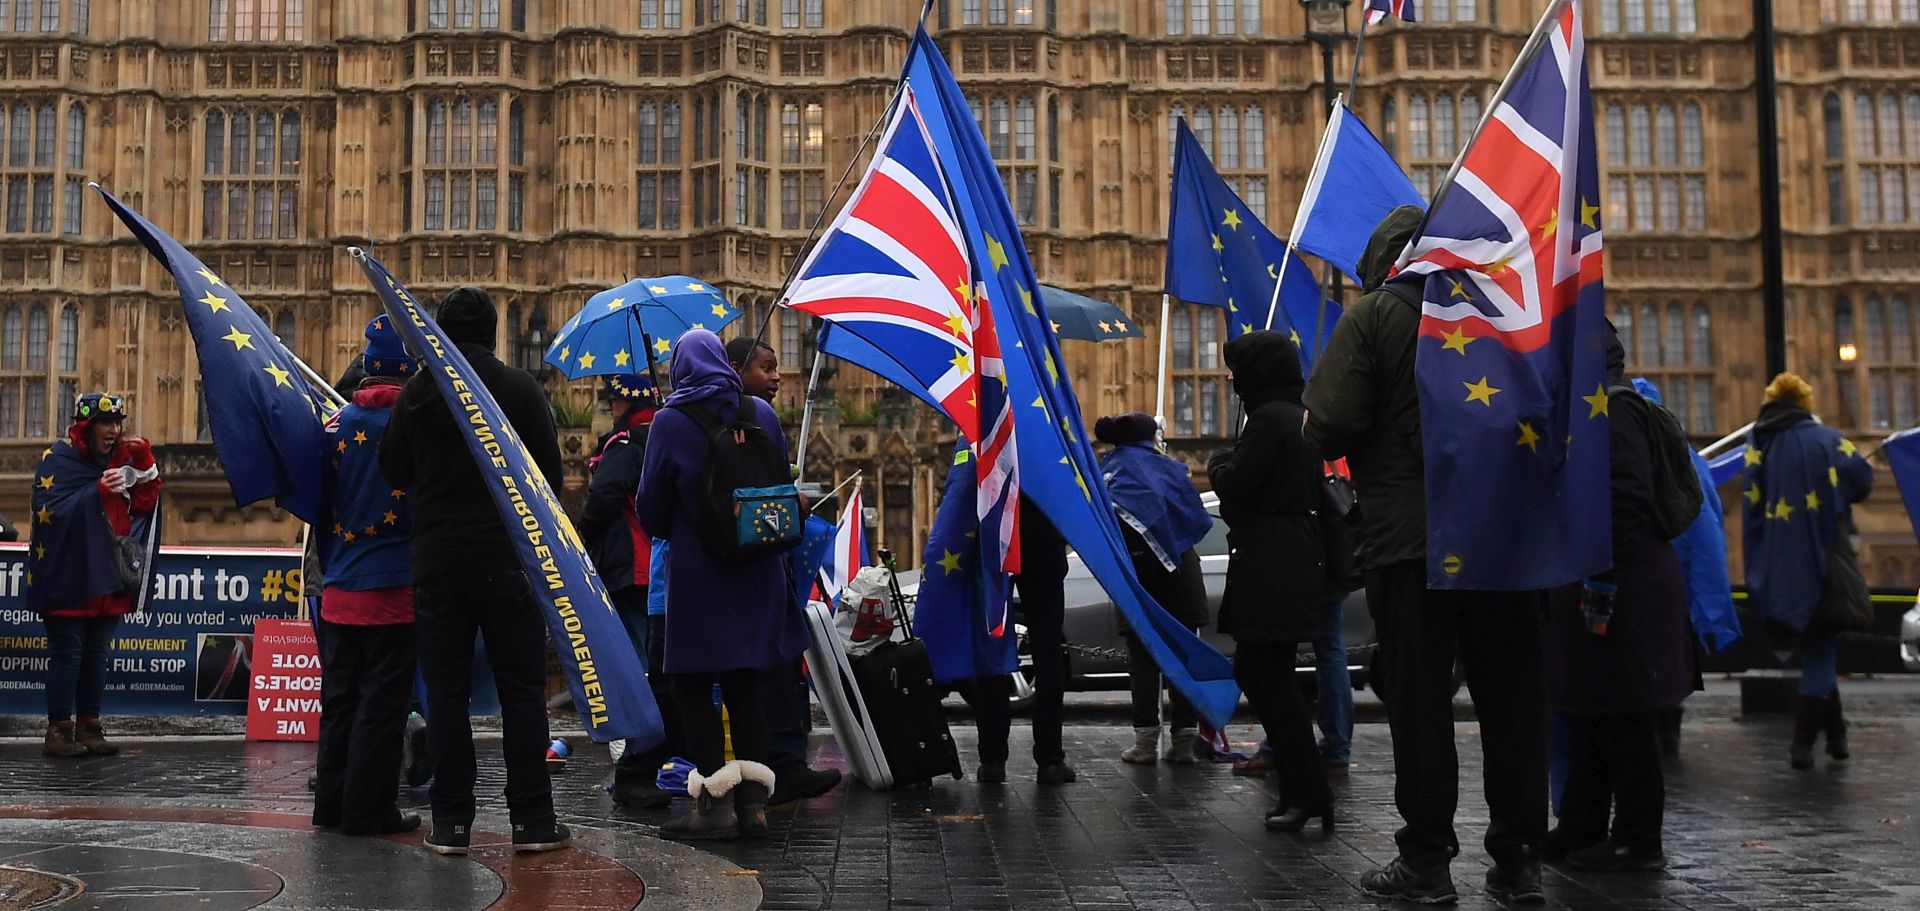 epa07179757 Anti Brexit protesters demonstrate outside Parliament in London, Britain, 20 November 2018. British Prime Minister Theresa May is facing a challenge to her leadership from hard Brexiteers who want to derail her EU withdrawal agreement.  EPA/ANDY RAIN